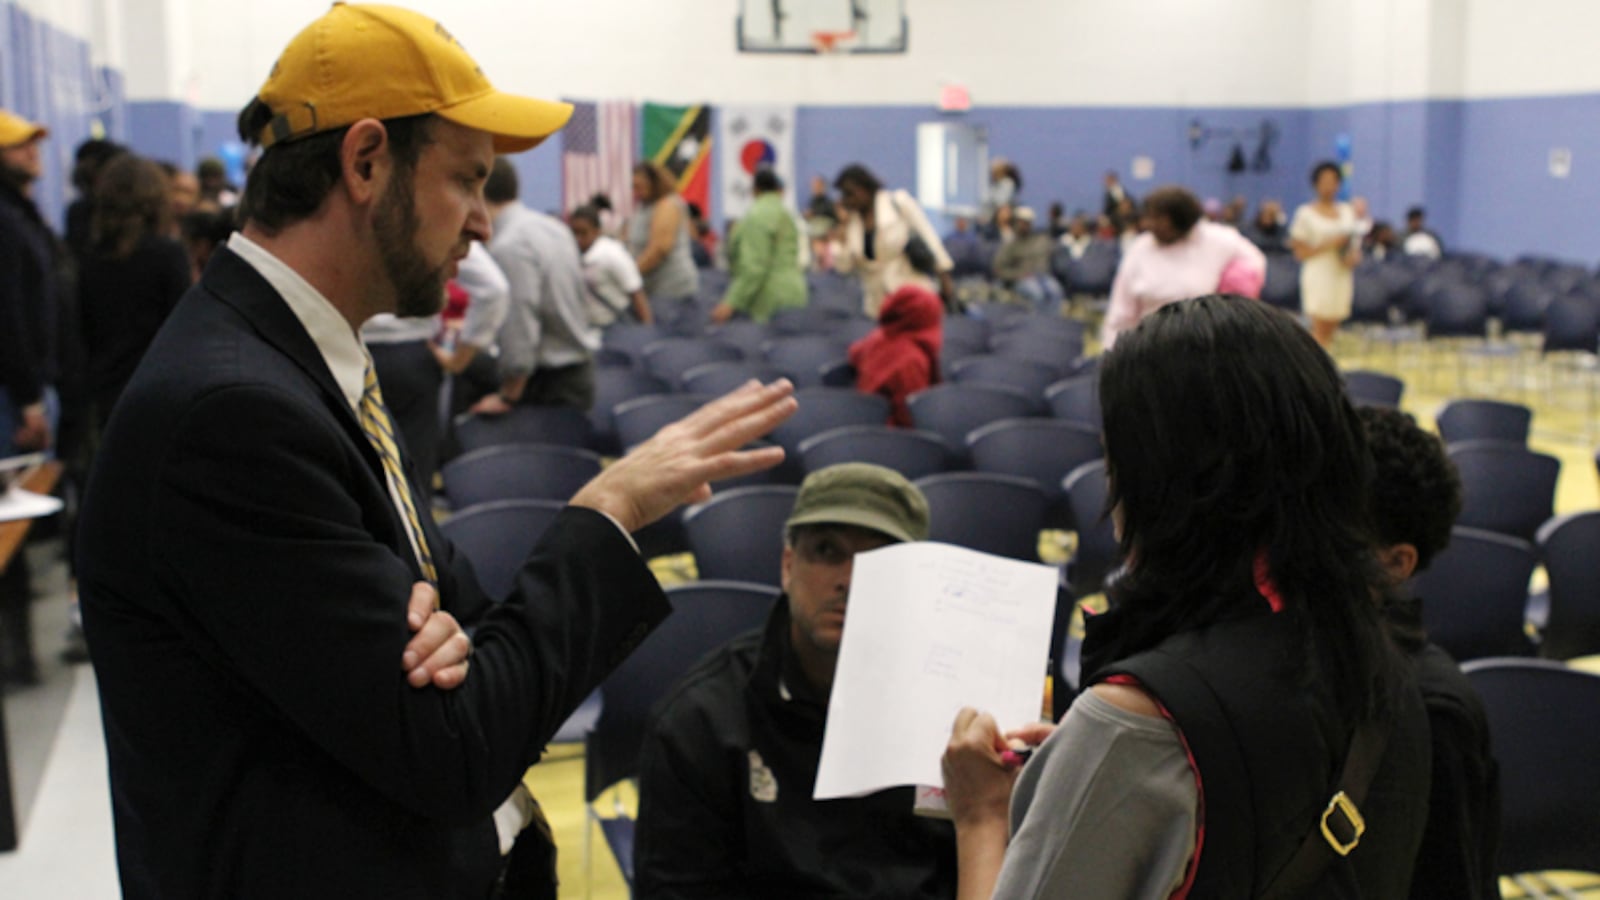 Democracy Prep charter network superintendent Seth Andrew at a 2012 admissions lottery event.